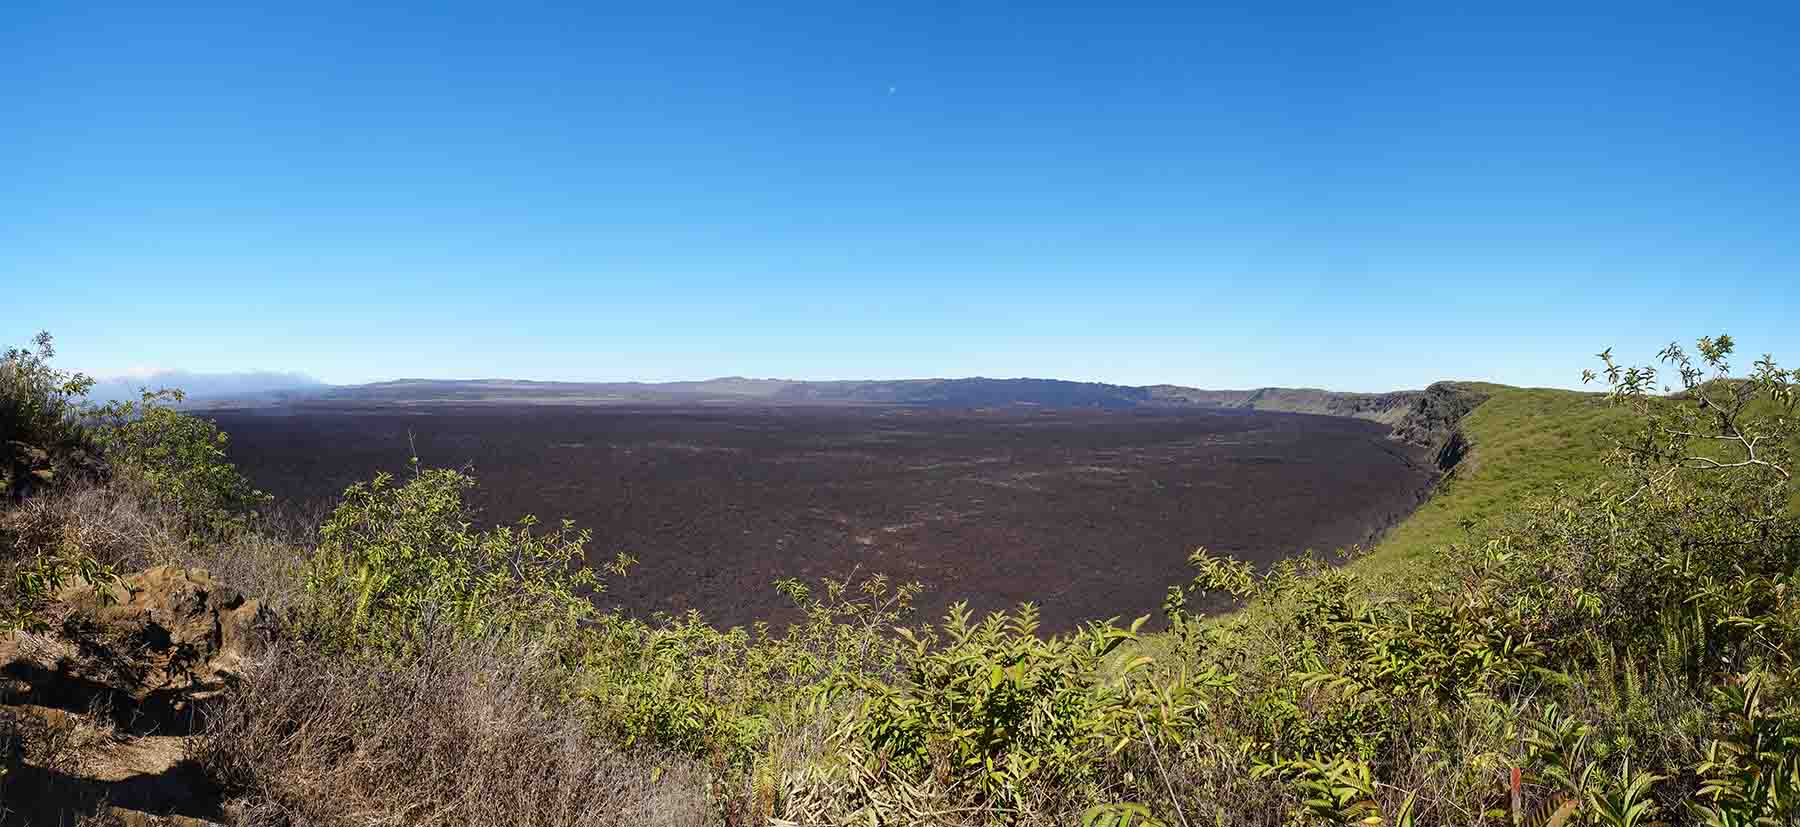  Galapagos | Sierra Negra Volcano, Galapagos – A Complete Visitors Guide